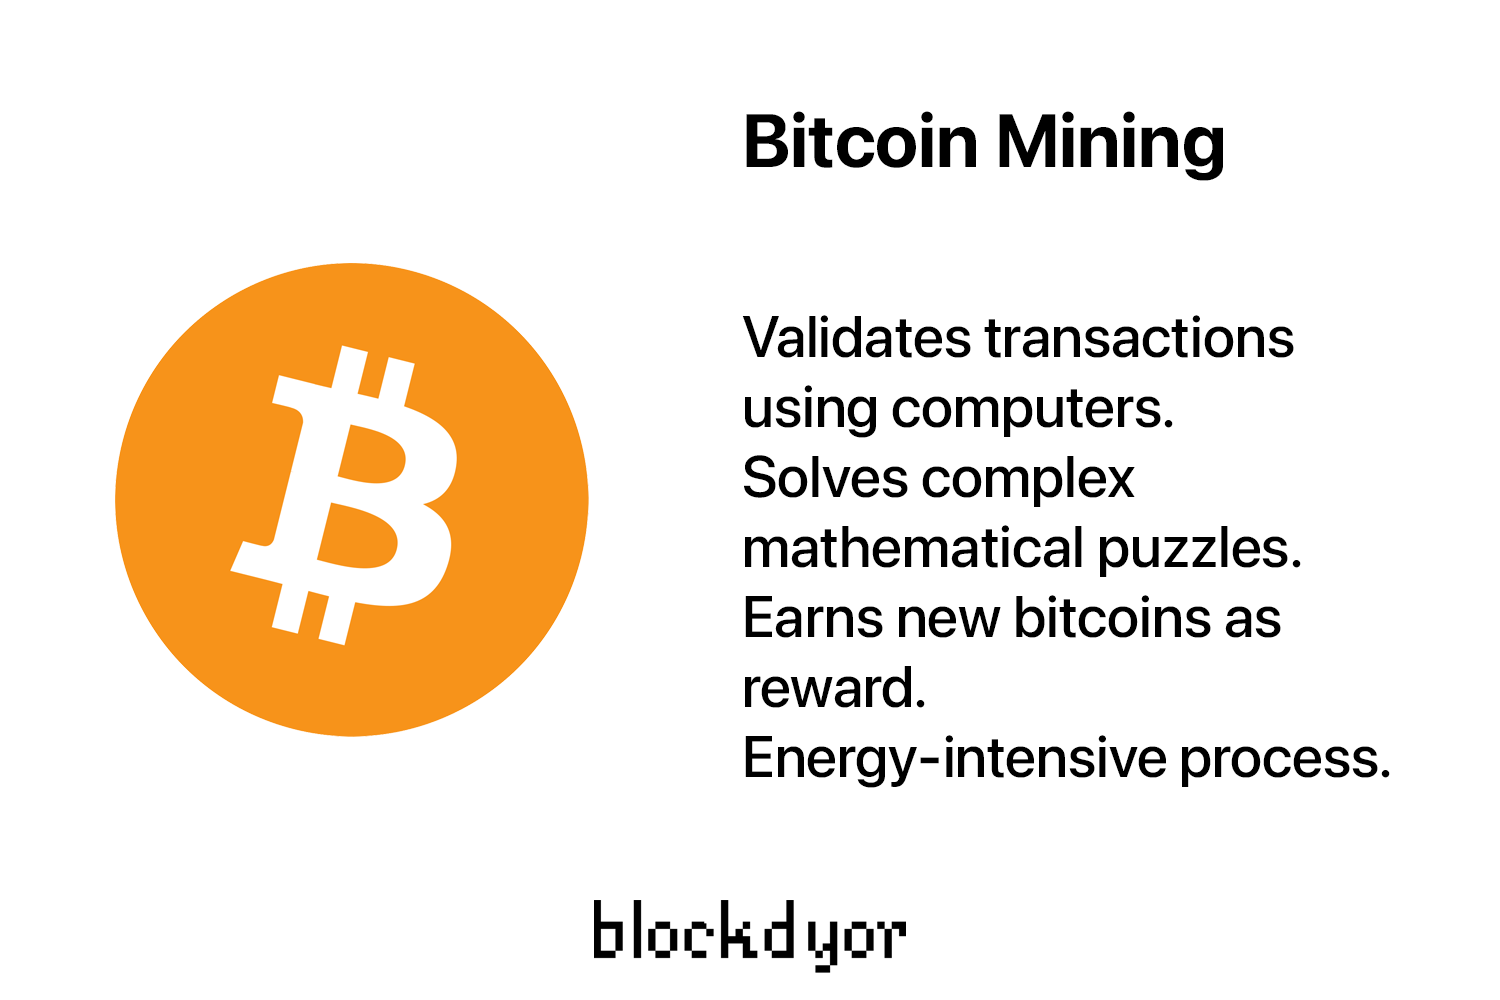 Bitcoin Mining Overview